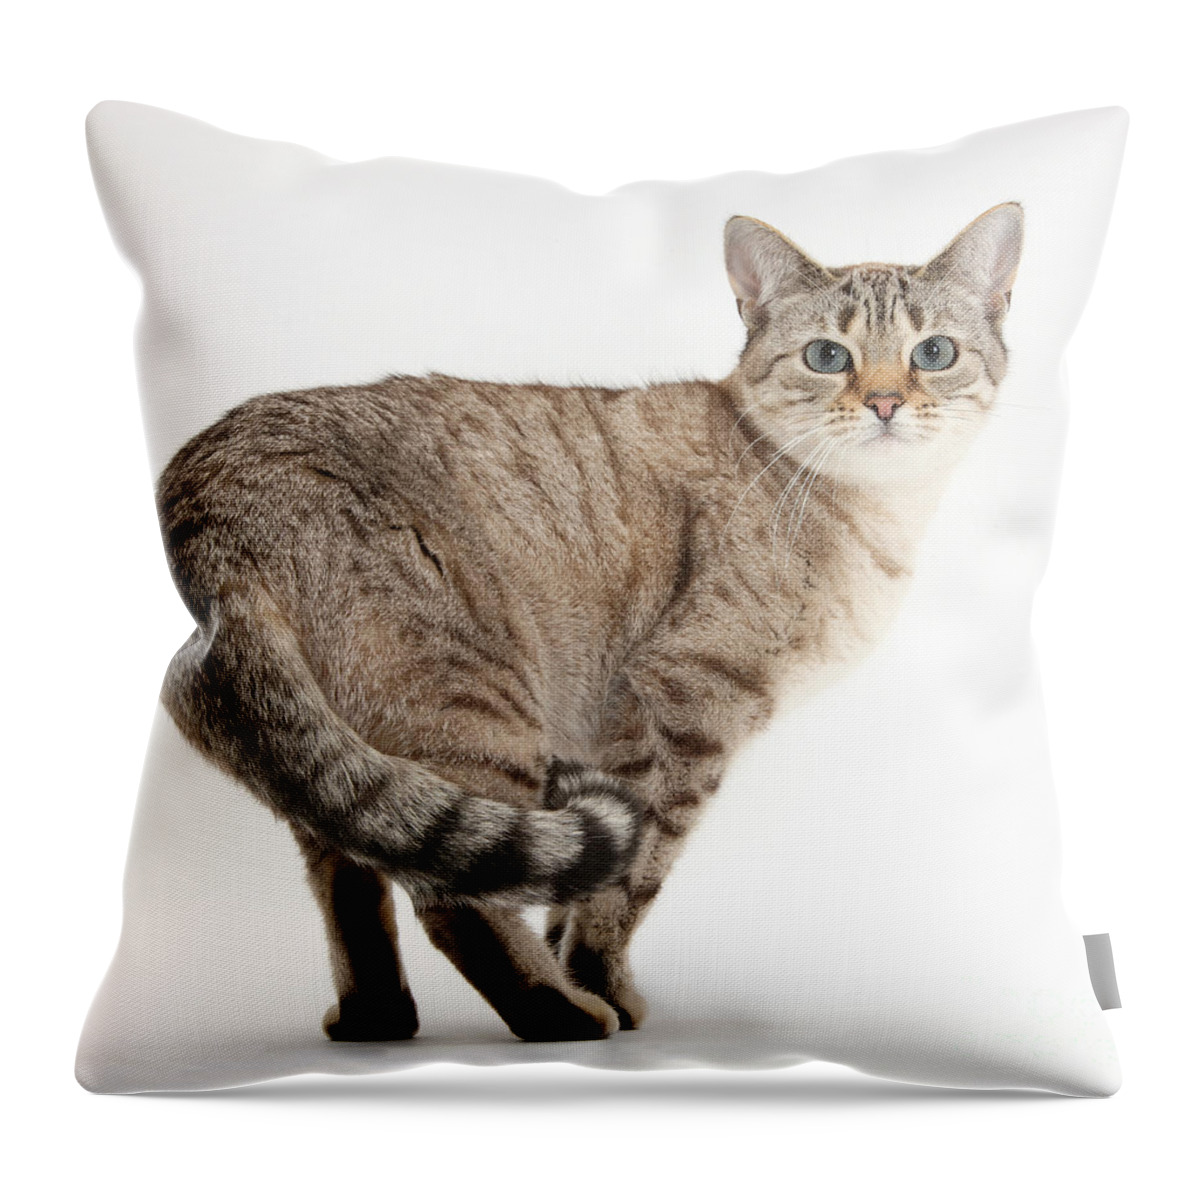 Sepia Snow Bengal-cross Female Cat Throw Pillow featuring the photograph Snow Bengal-cross by Mark Taylor